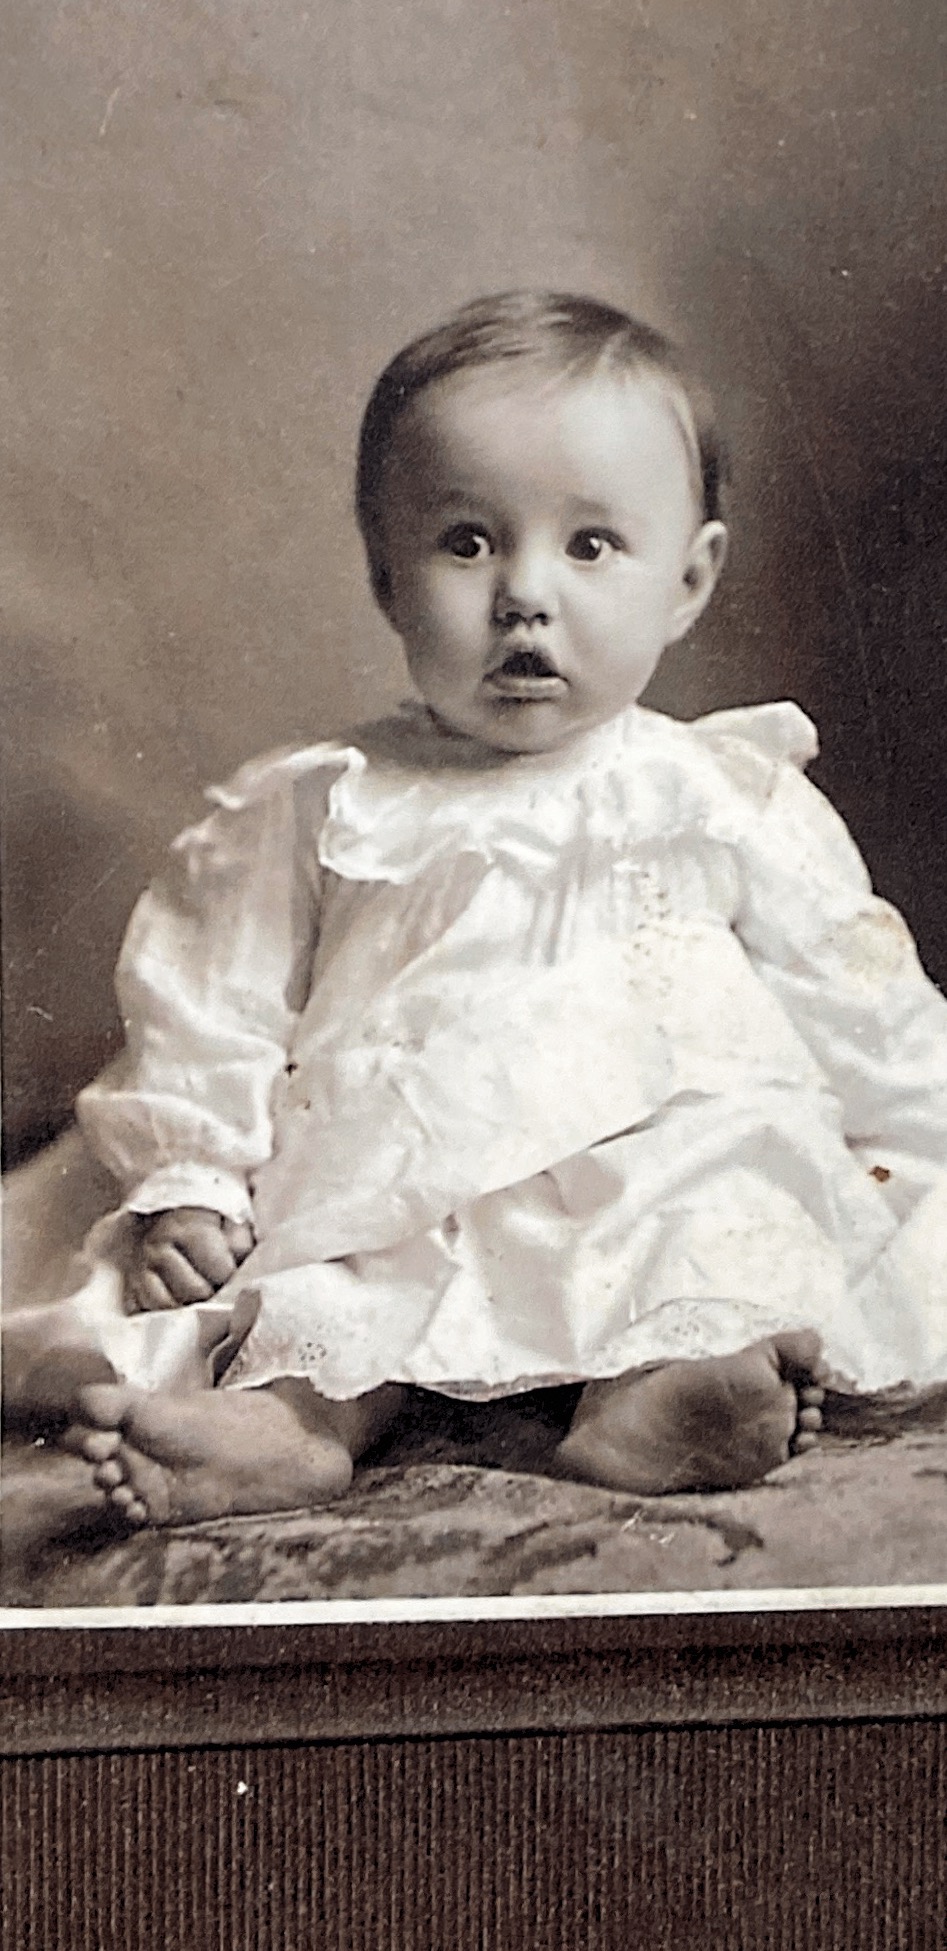 Greatuncle BirthApr 1902the youngest child born James Franklin-dard was born Colorado Springs